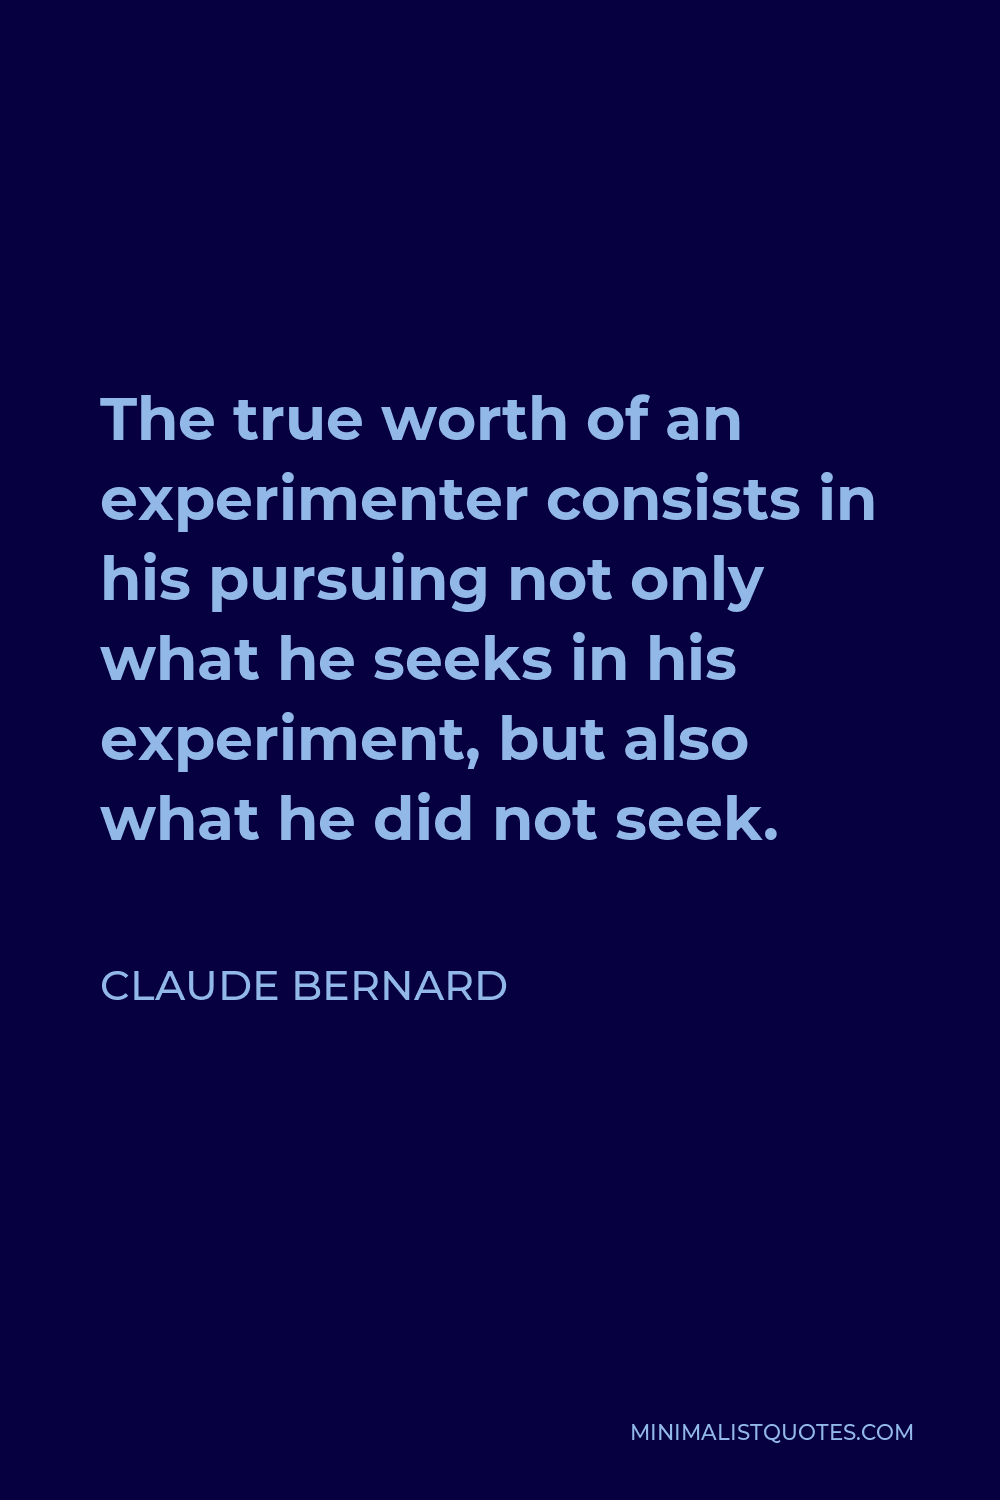 Claude Bernard Quote - The true worth of an experimenter consists in his pursuing not only what he seeks in his experiment, but also what he did not seek.